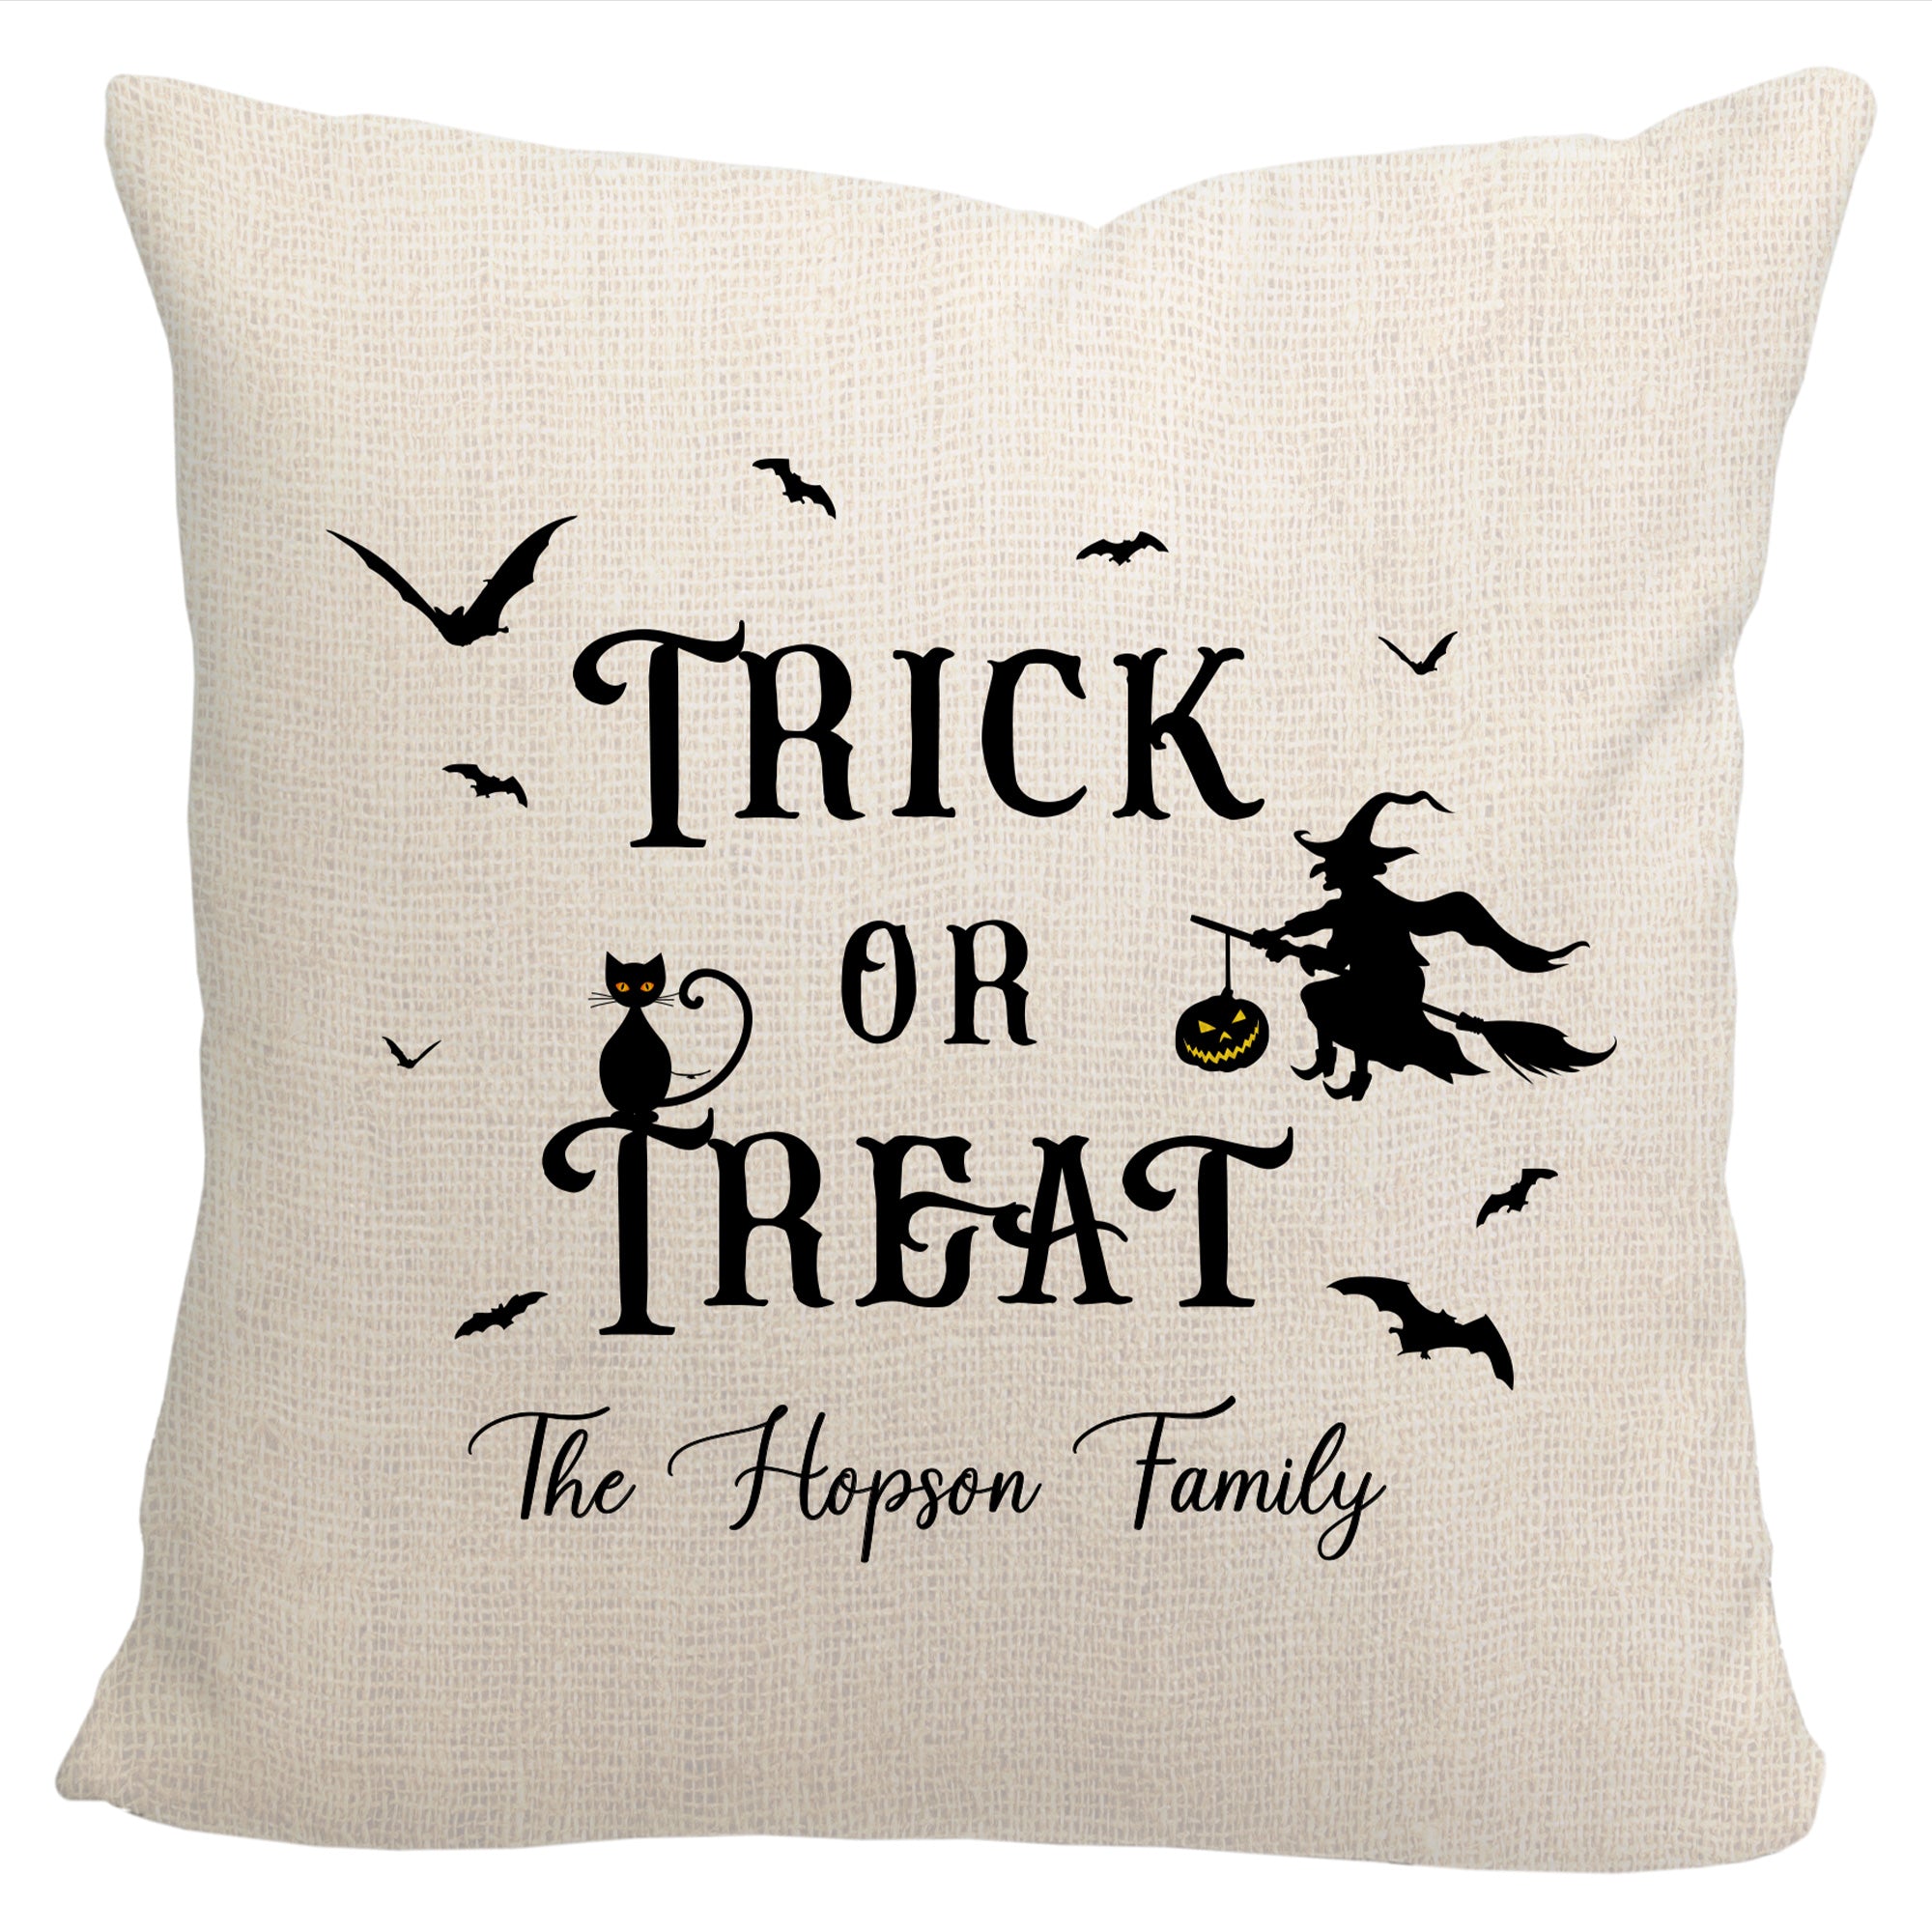 Pattern Pop - Personalized Trick or Treat Throw Pillow - Throw Pillow and Cover - Decorative Holiday Throw Pillow - 18” x 18 Square Pillow and Cover